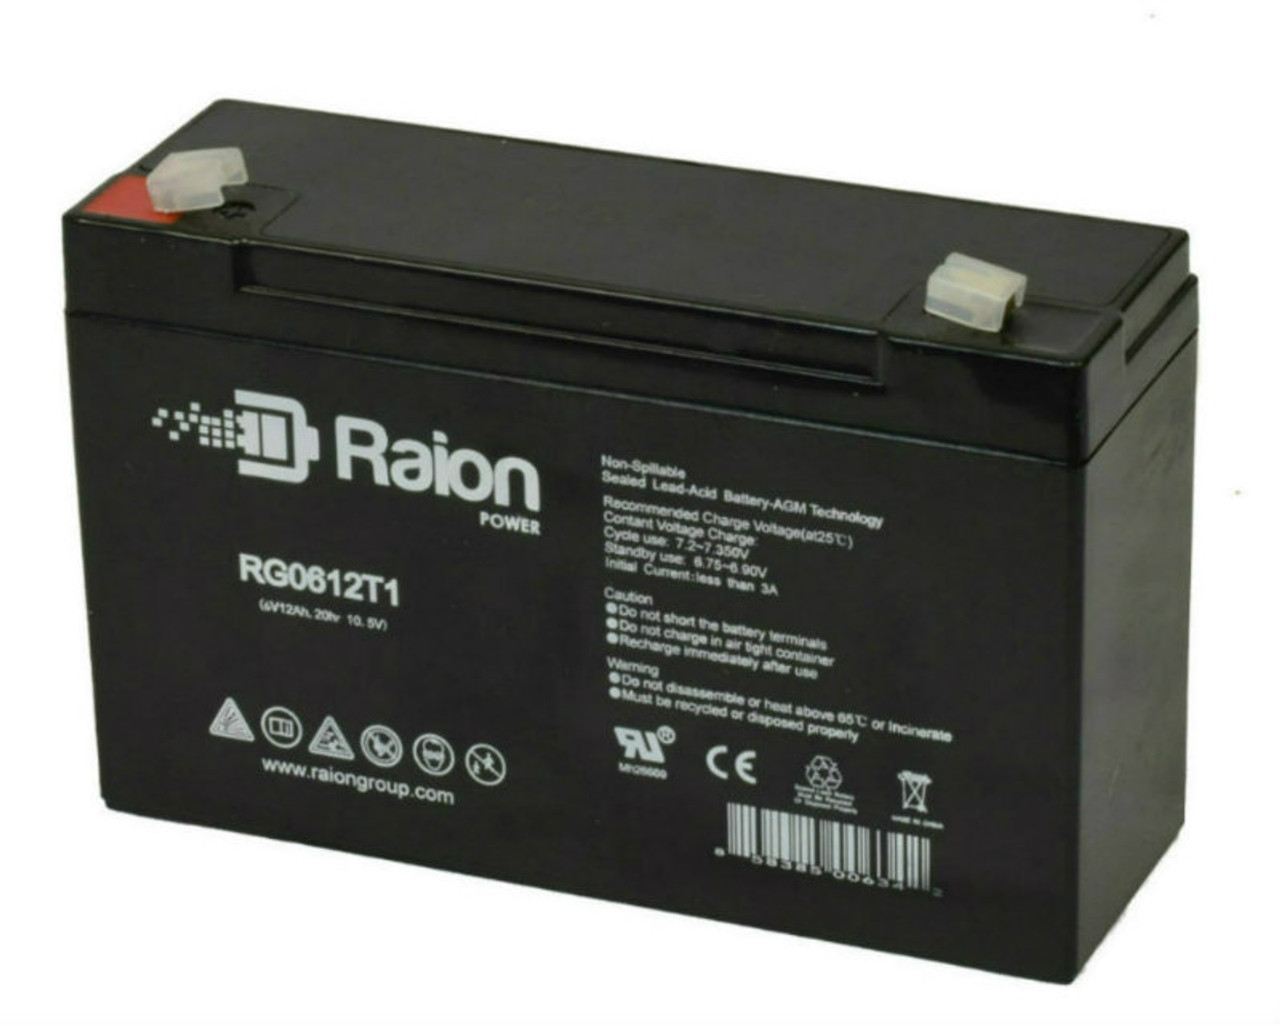 Raion Power RG06120T1 Replacement Emergency Light Battery for Light Alarms 2PLP1